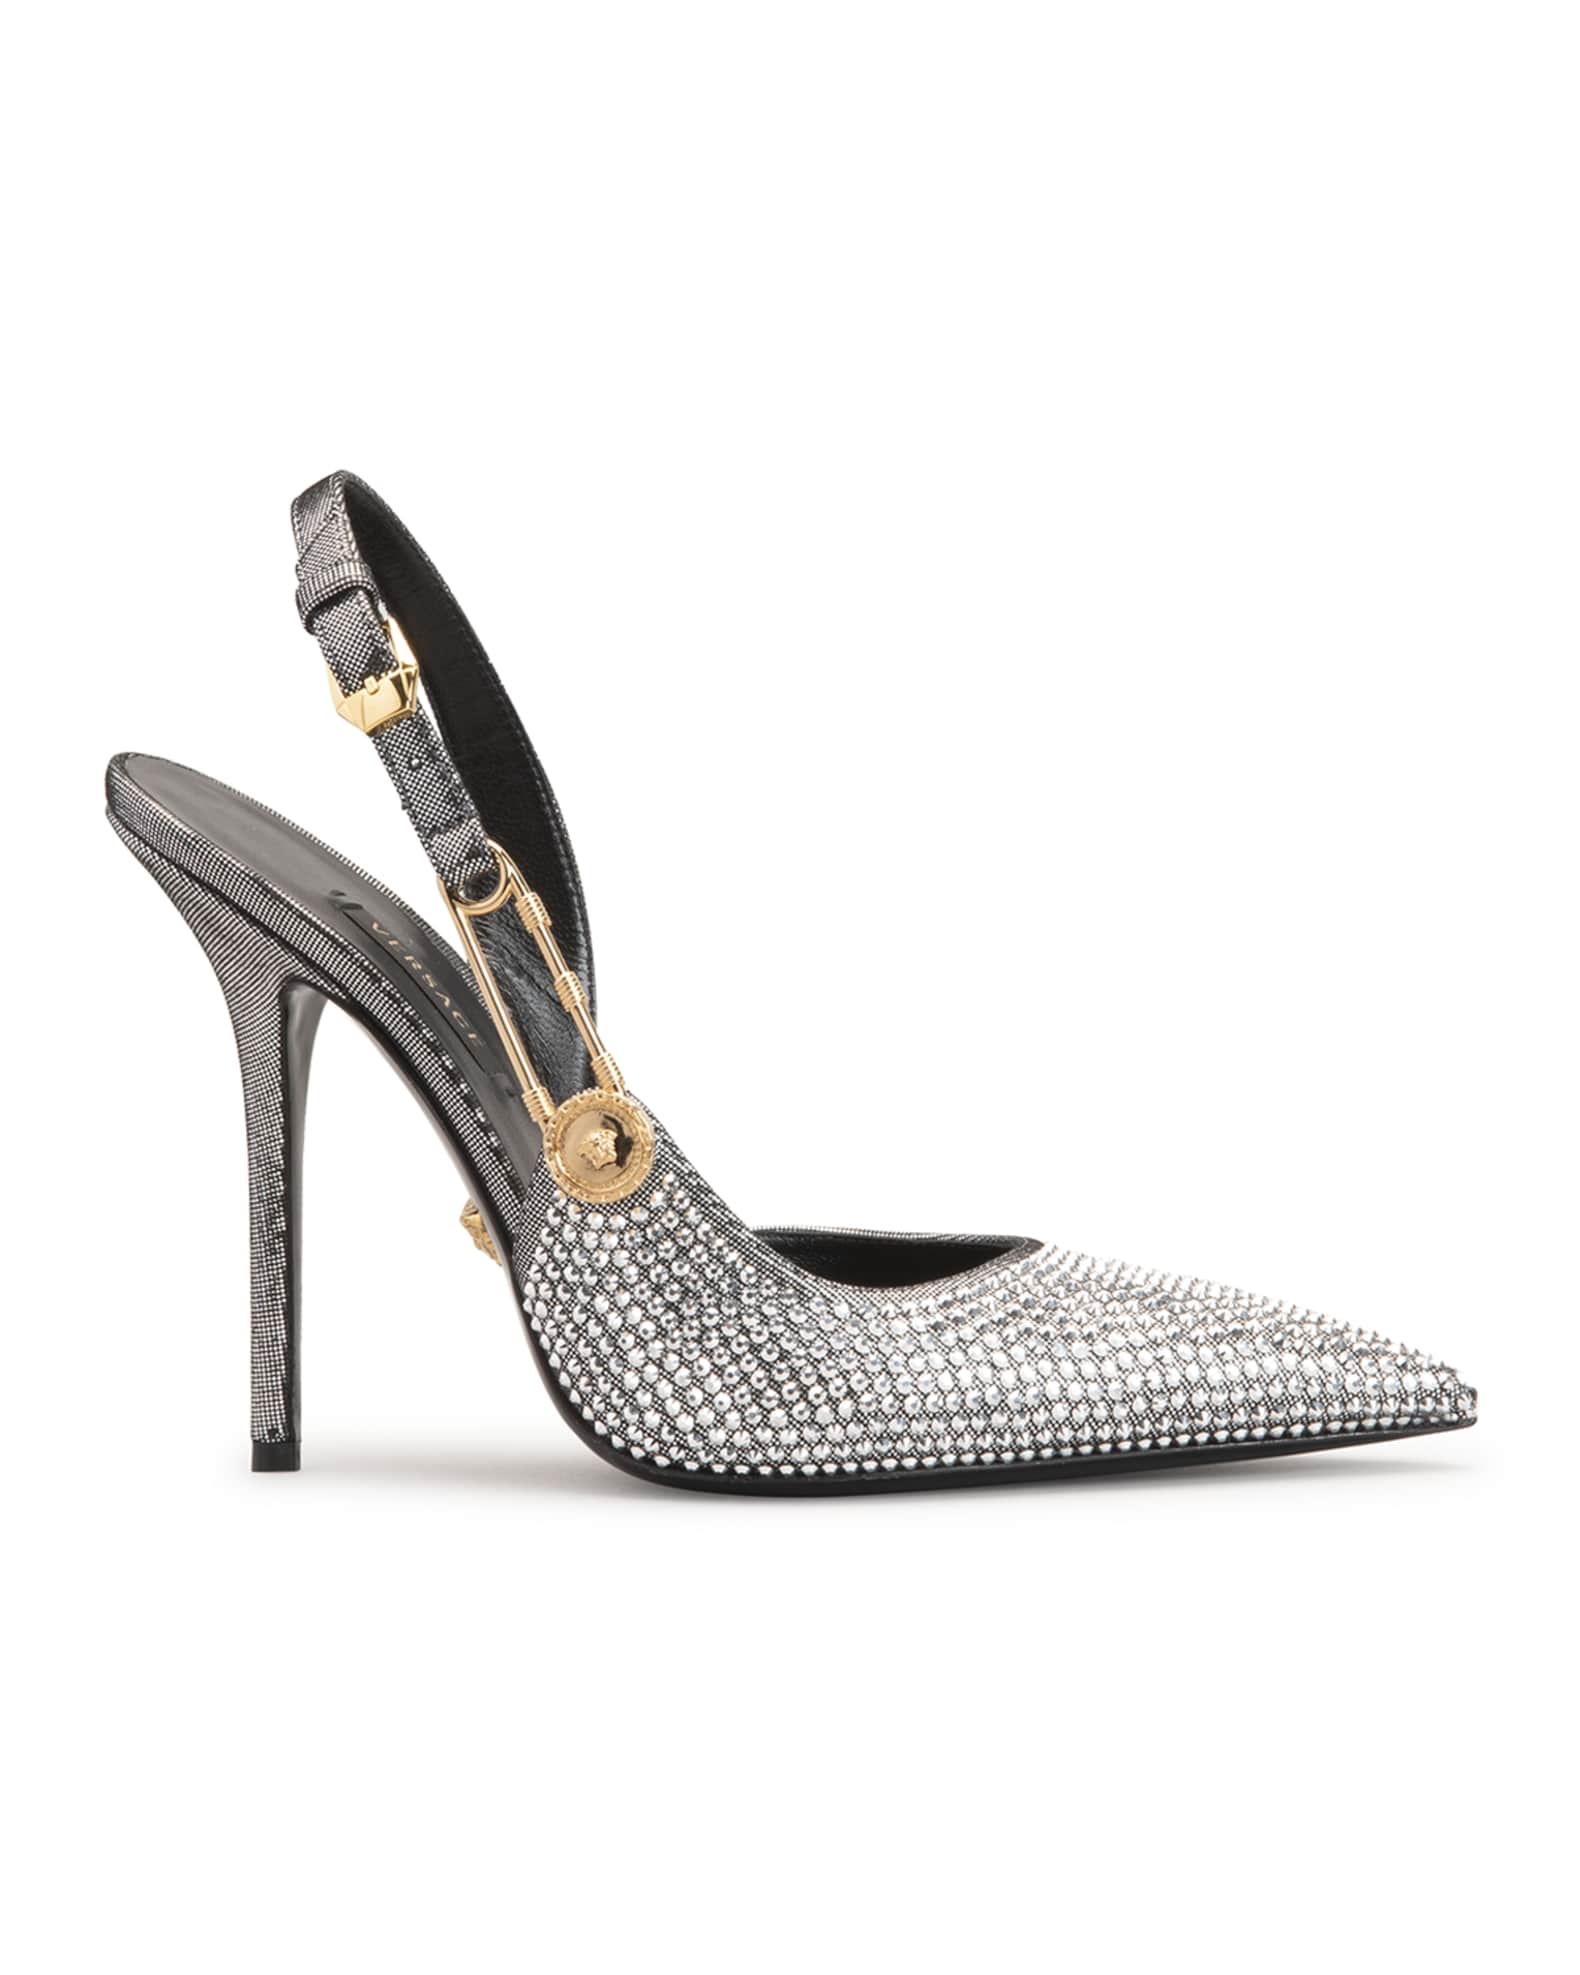 Silver Versace heels with safety pin